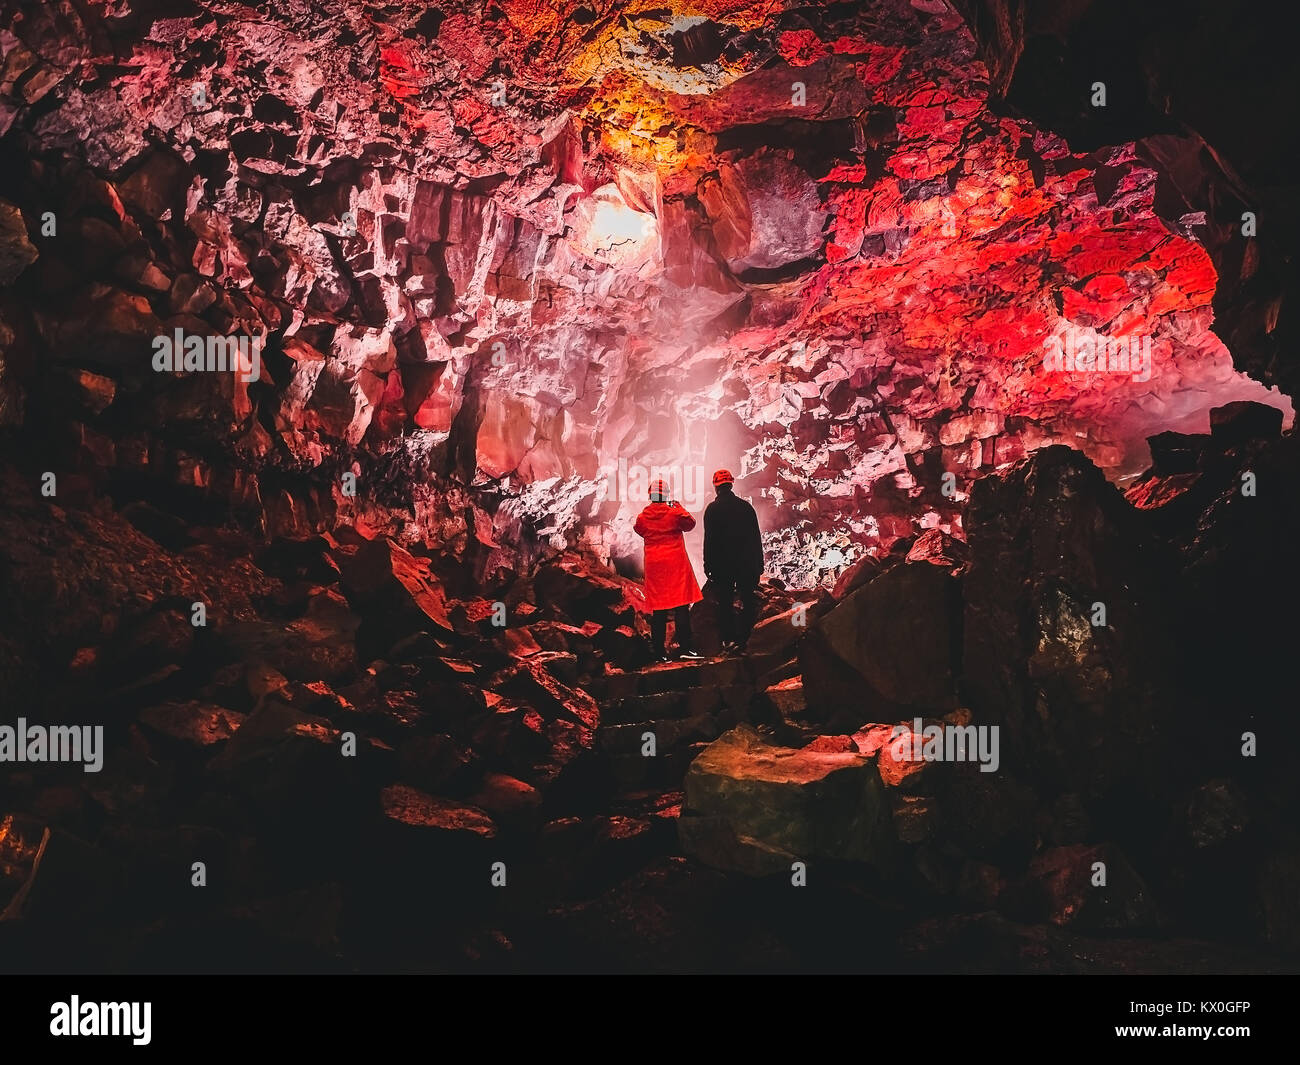 Two tourists Inside the magnificent red lava tunnel Raufarholshellir close to Reykjavik, Iceland Stock Photo